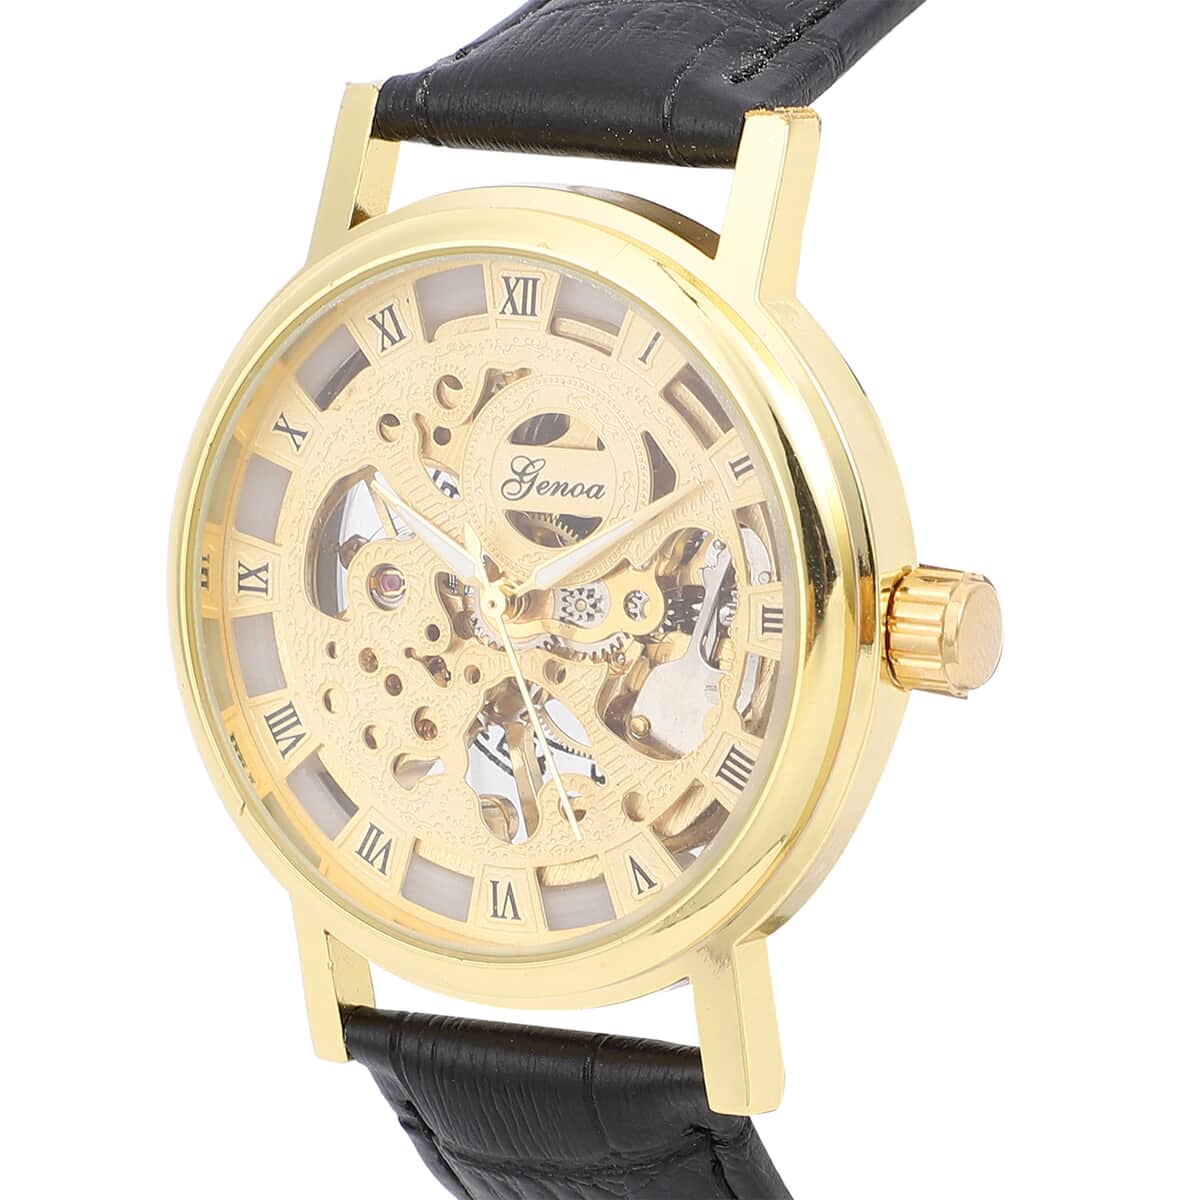 Genoa Automatic Mechanical Movement Hollowed Out Watch in Goldtone with Black Leather Band image number 3